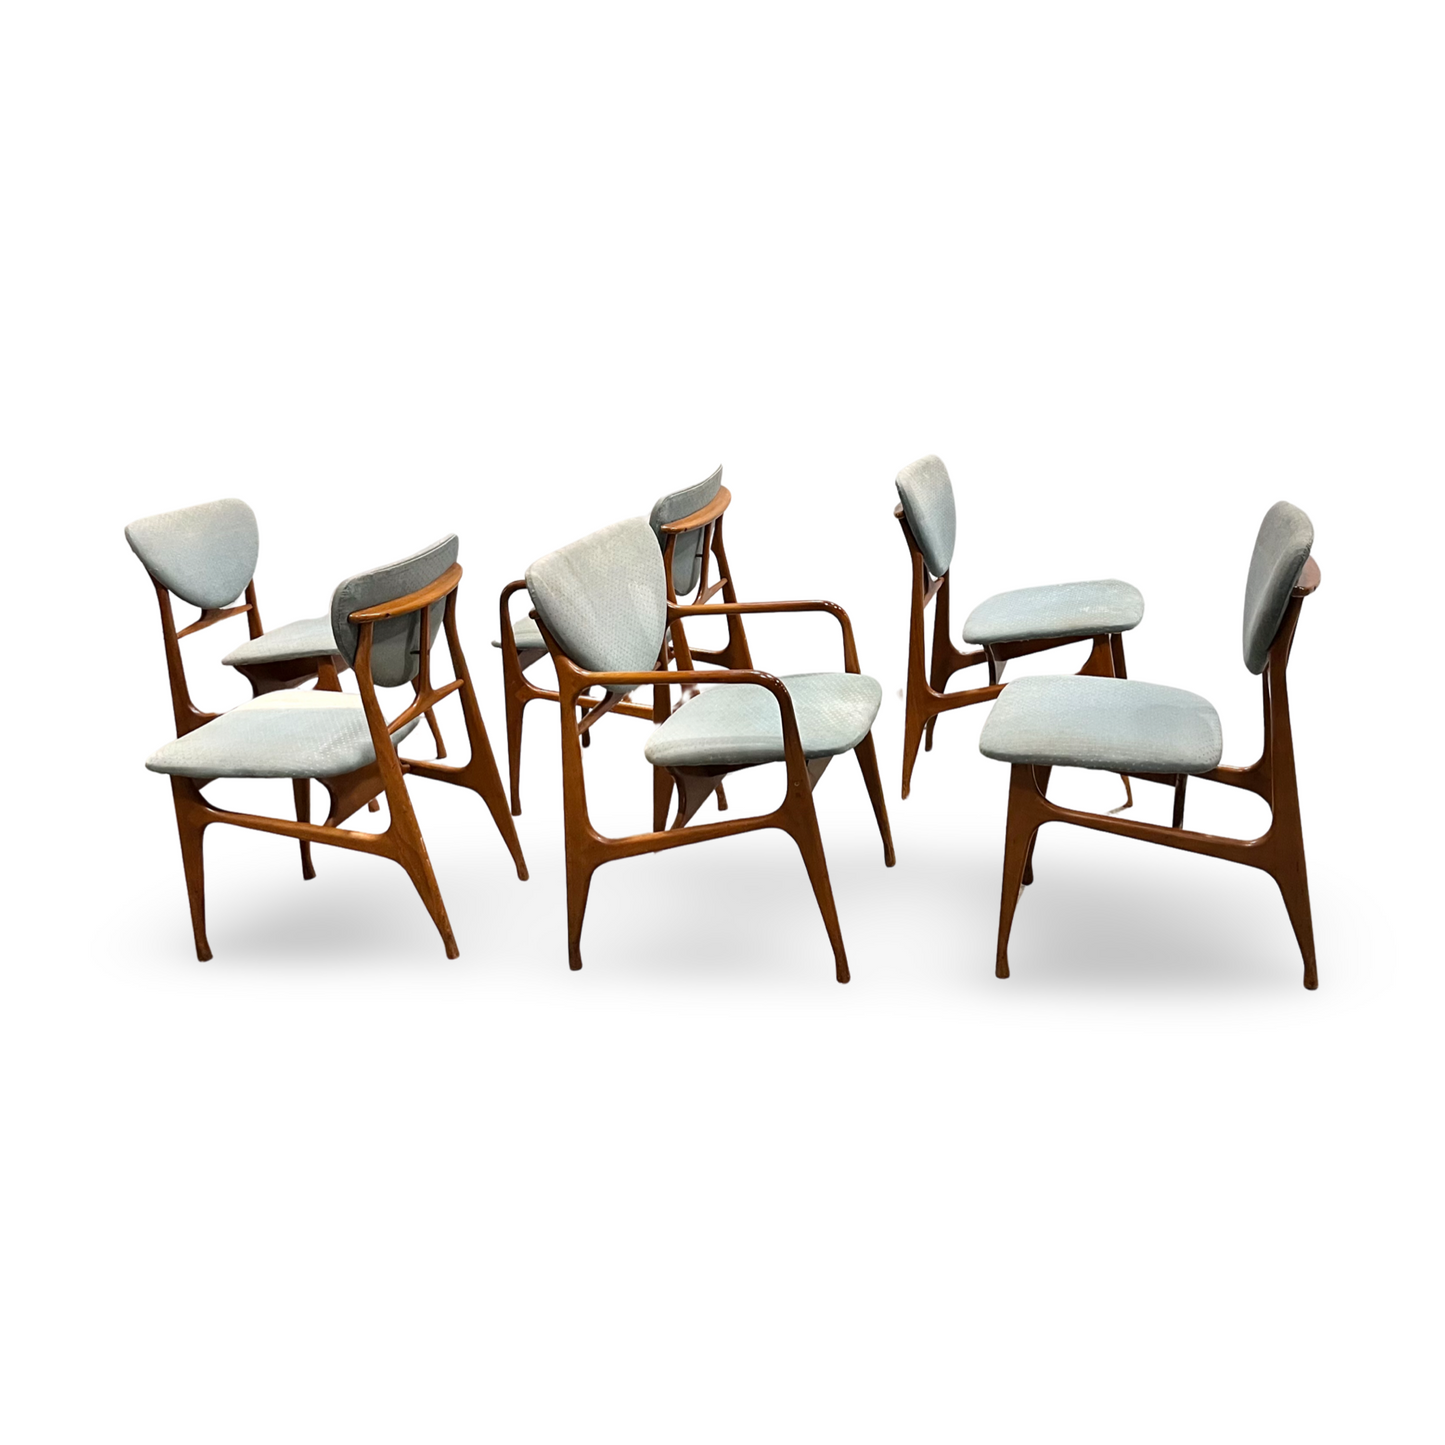 Specialty Woodcraft Vintage Danish Mid Century Modern Set of 6 Dining Chairs c. 1960s